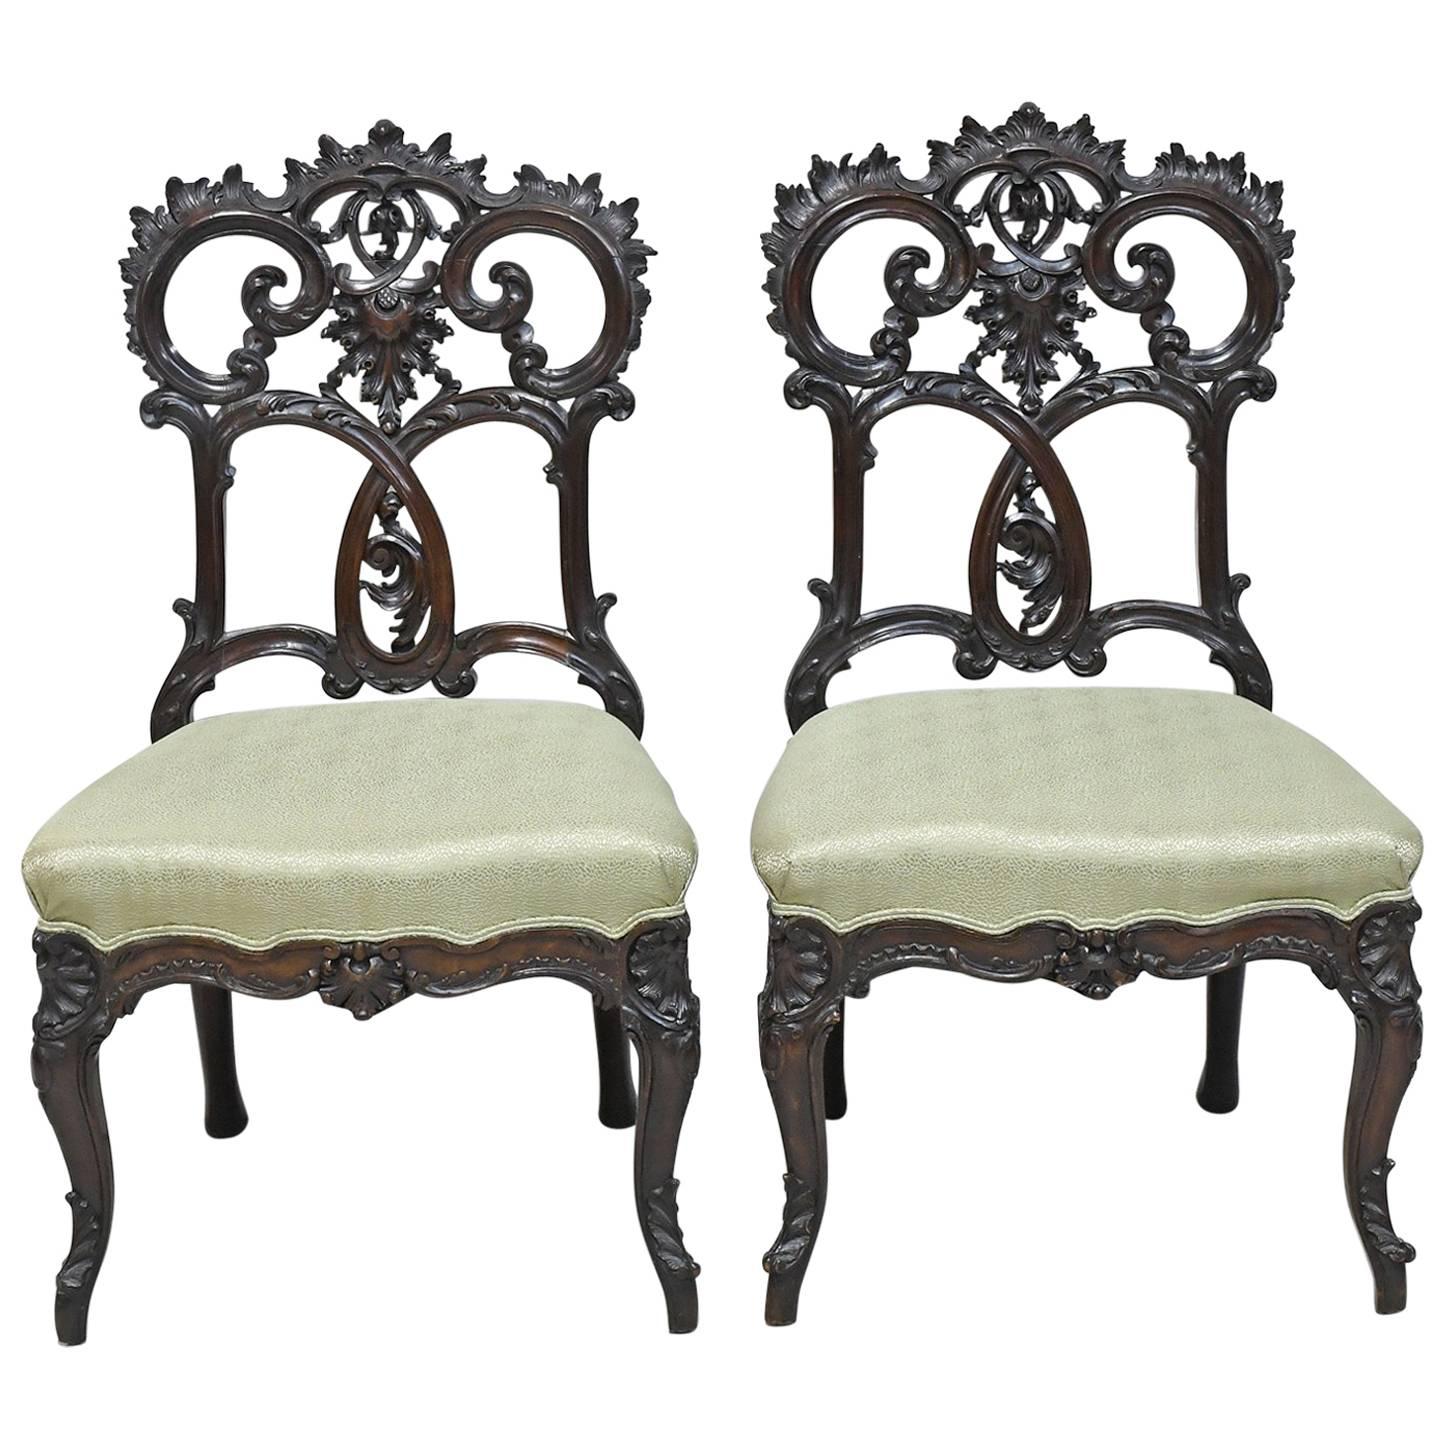 Pair of Antique American Carved Rococo Revival Chairs in Mahogany w/ Upholstery For Sale